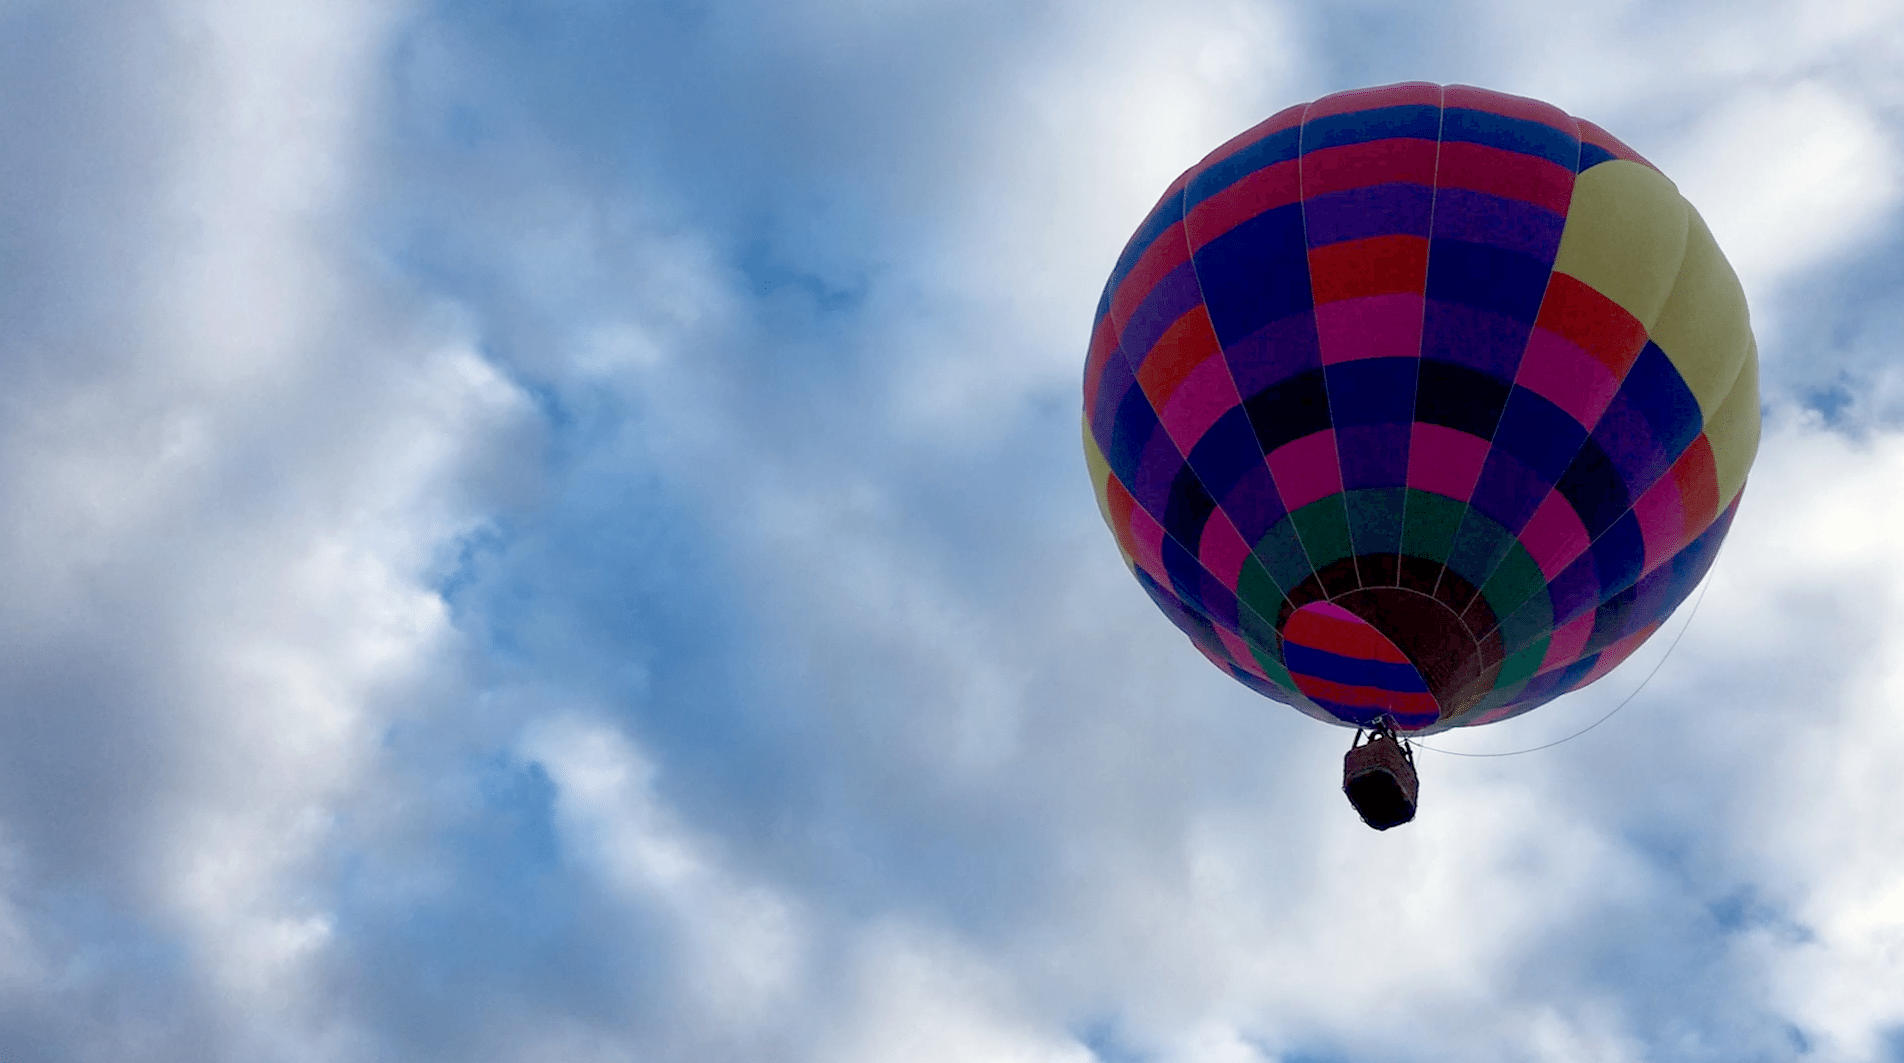 Best Destinations to Take a Hot Air Balloon Ride